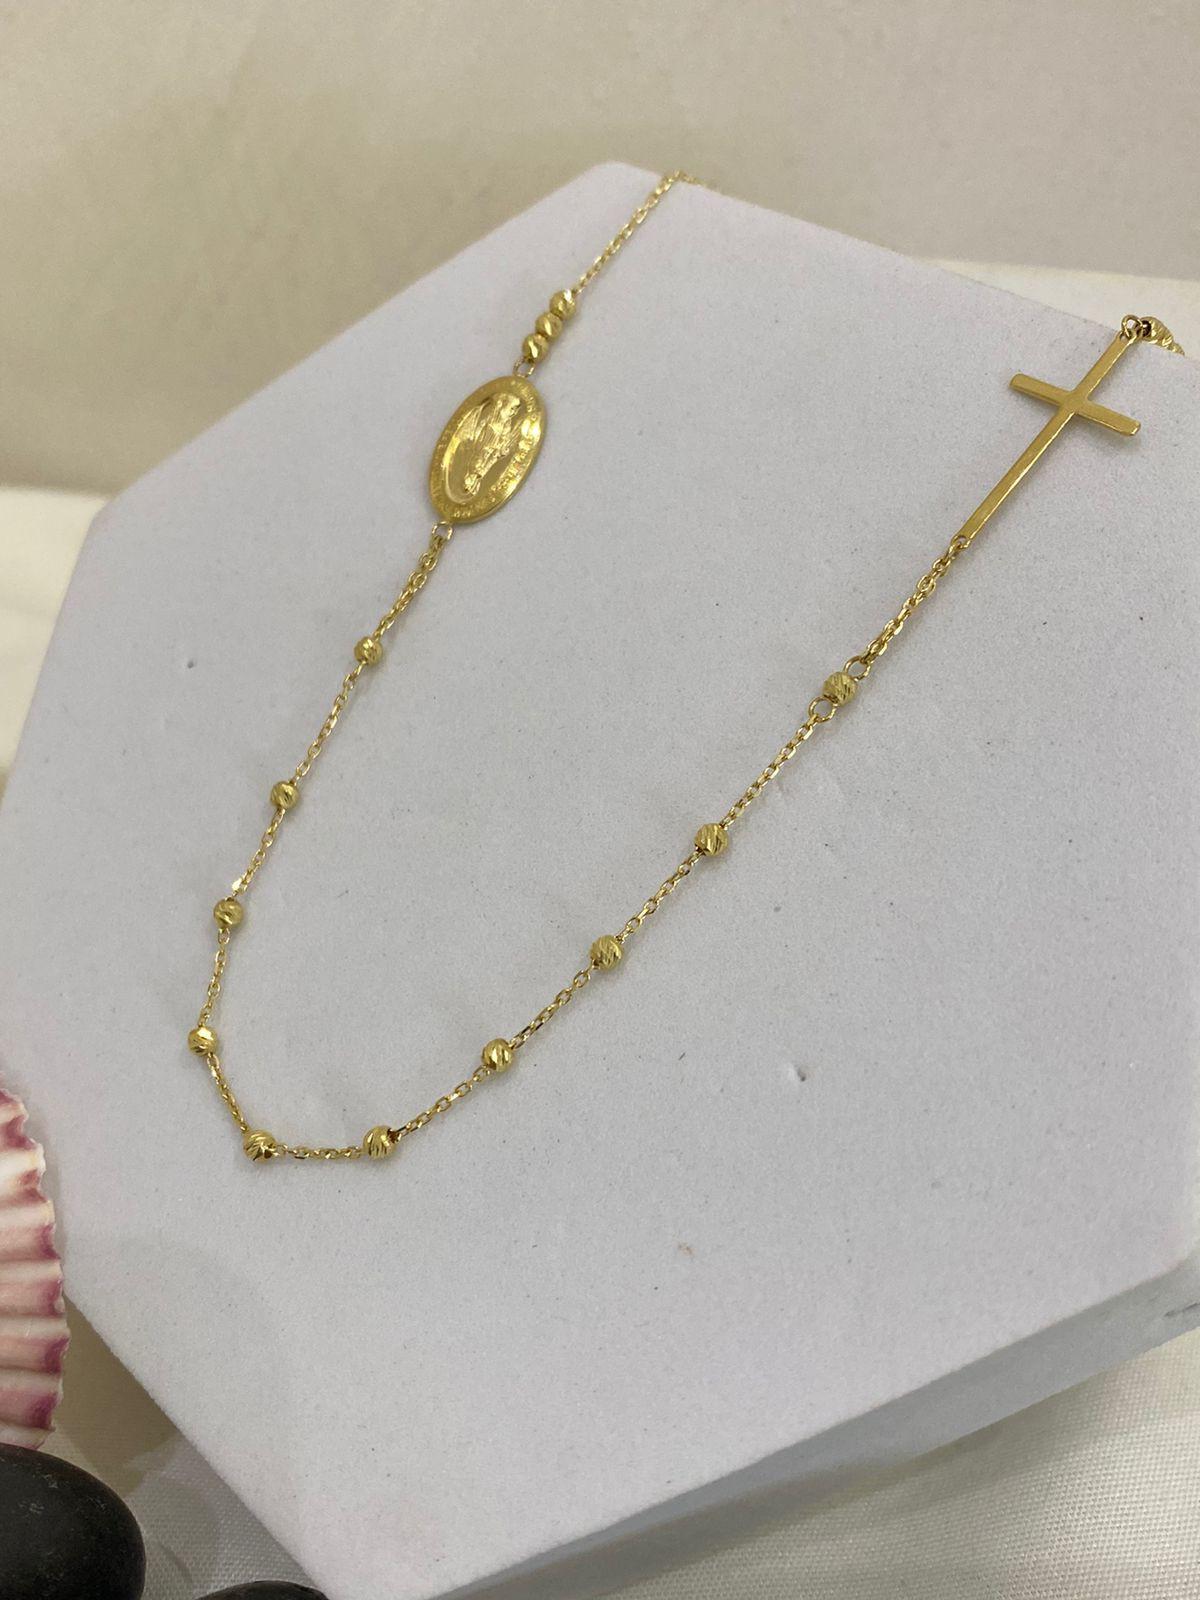 gold necklaceReal Gold Cross Necklace 18k - Sola Gold